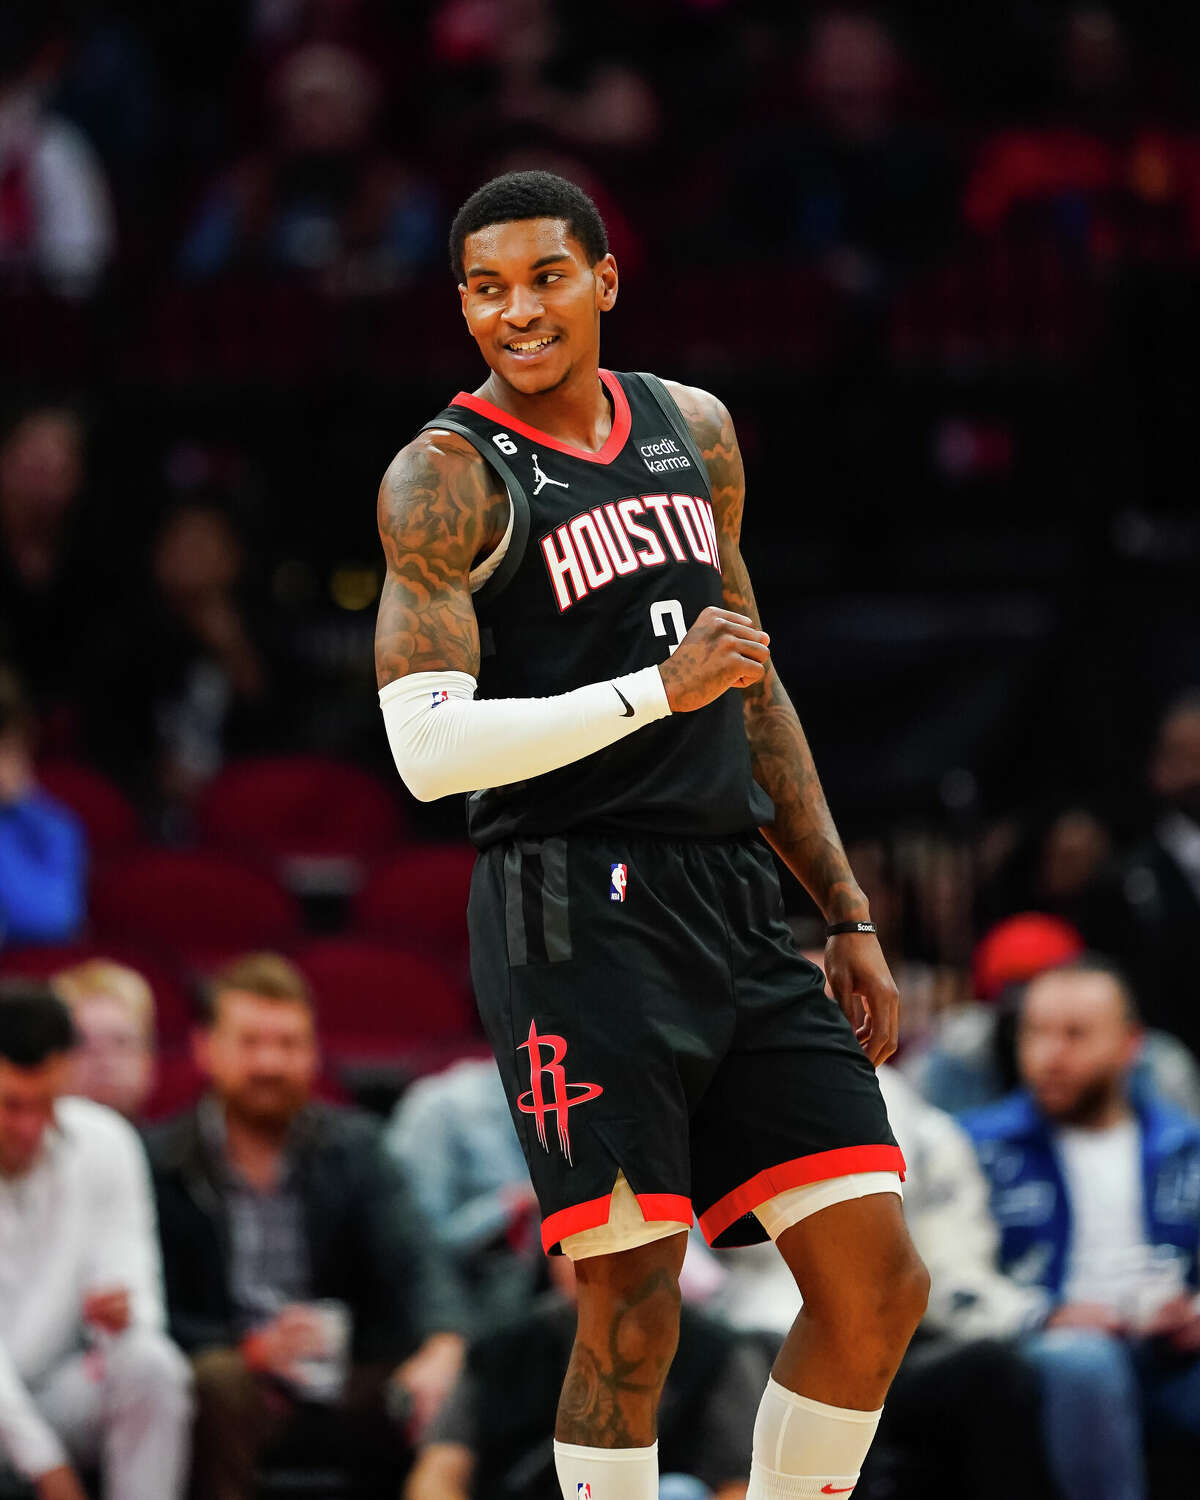 HOUSTON, TEXAS - NOVEMBER 26: Kevin Porter Jr. #3 of the Houston Rockets reacts after a play during the first quarter of the game against the Oklahoma City Thunder at Toyota Center on November 26, 2022 in Houston, Texas. NOTE TO USER: User expressly acknowledges and agrees that, by downloading and or using this photograph, User is consenting to the terms and conditions of the Getty Images License Agreement. (Photo by Alex Bierens de Haan/Getty Images)